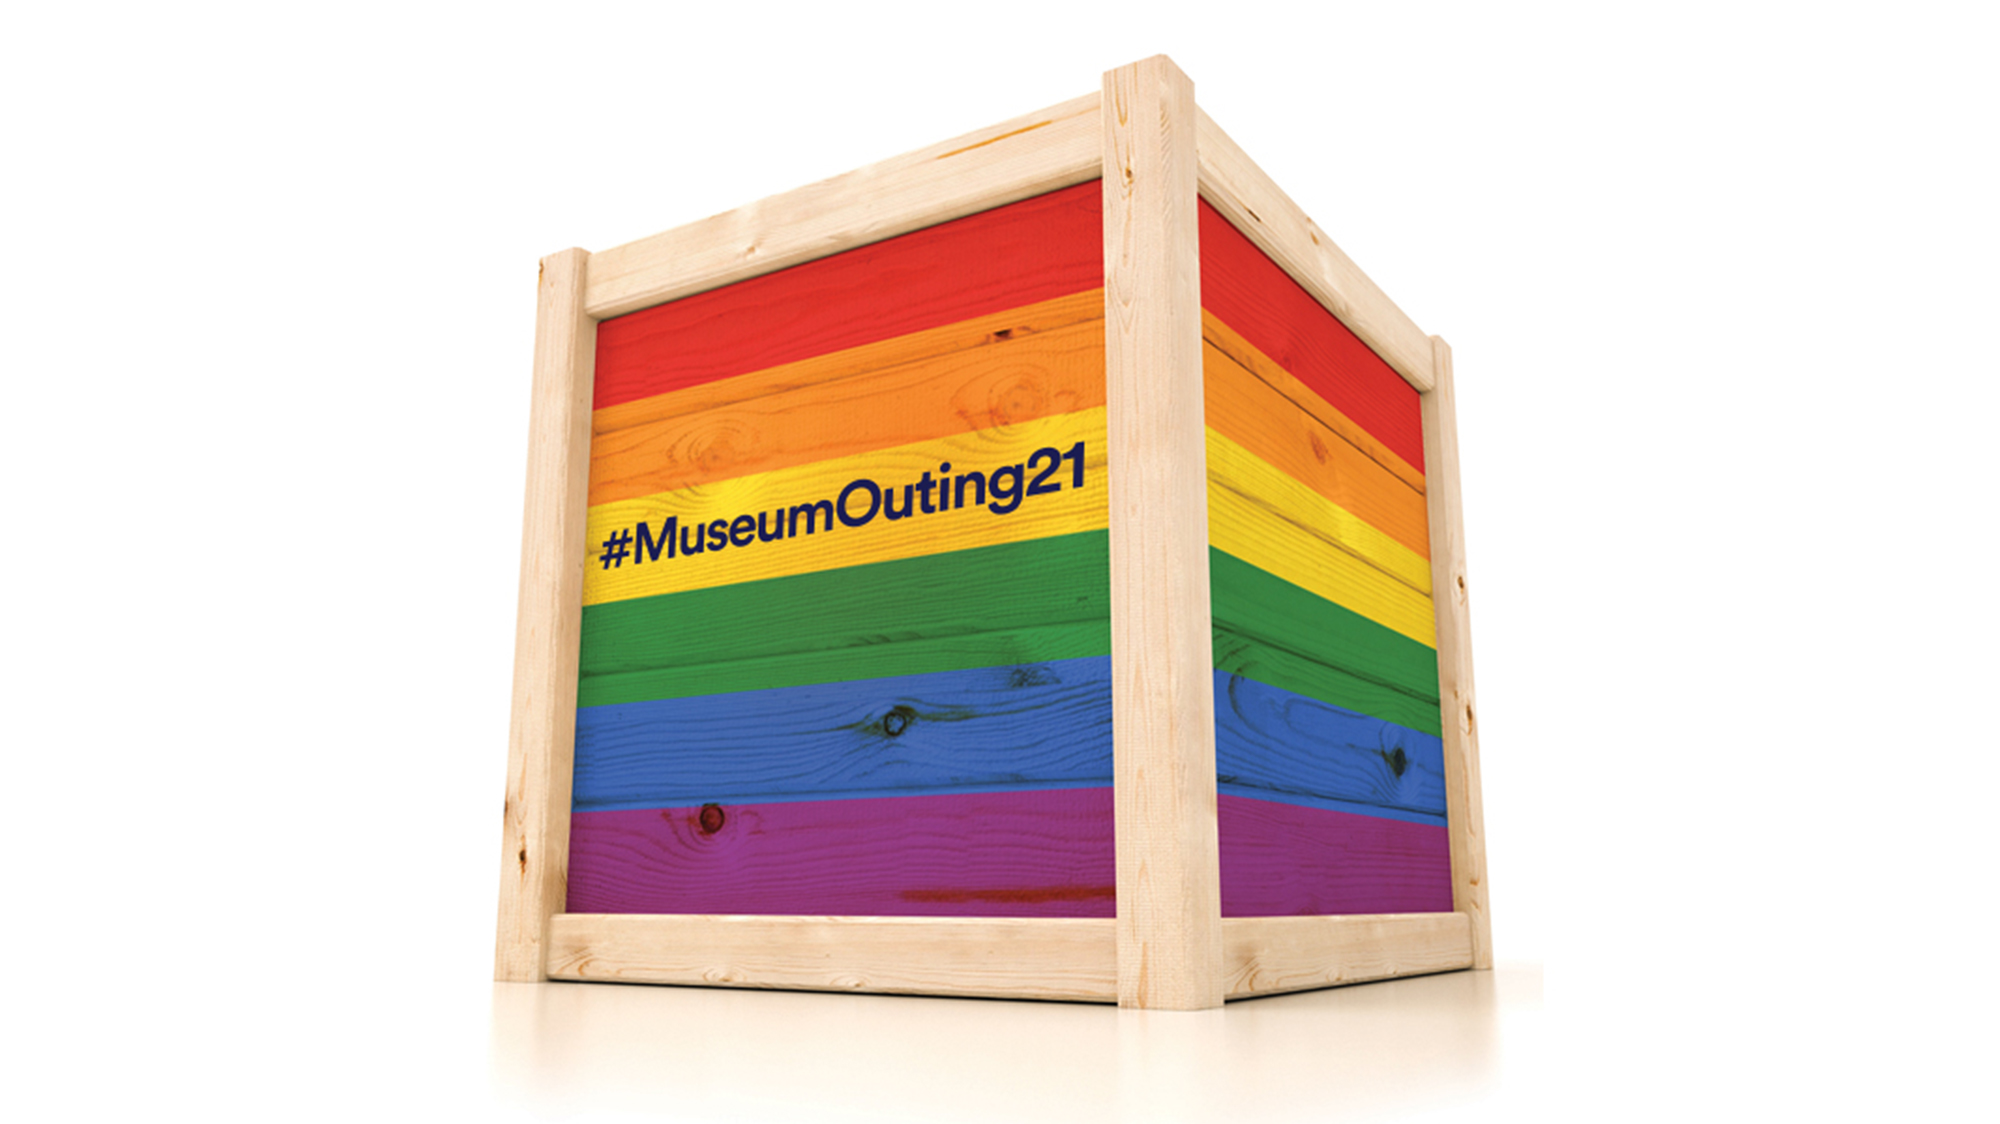 Photo of multicolours crate box with keywords: #MuseumOuting21